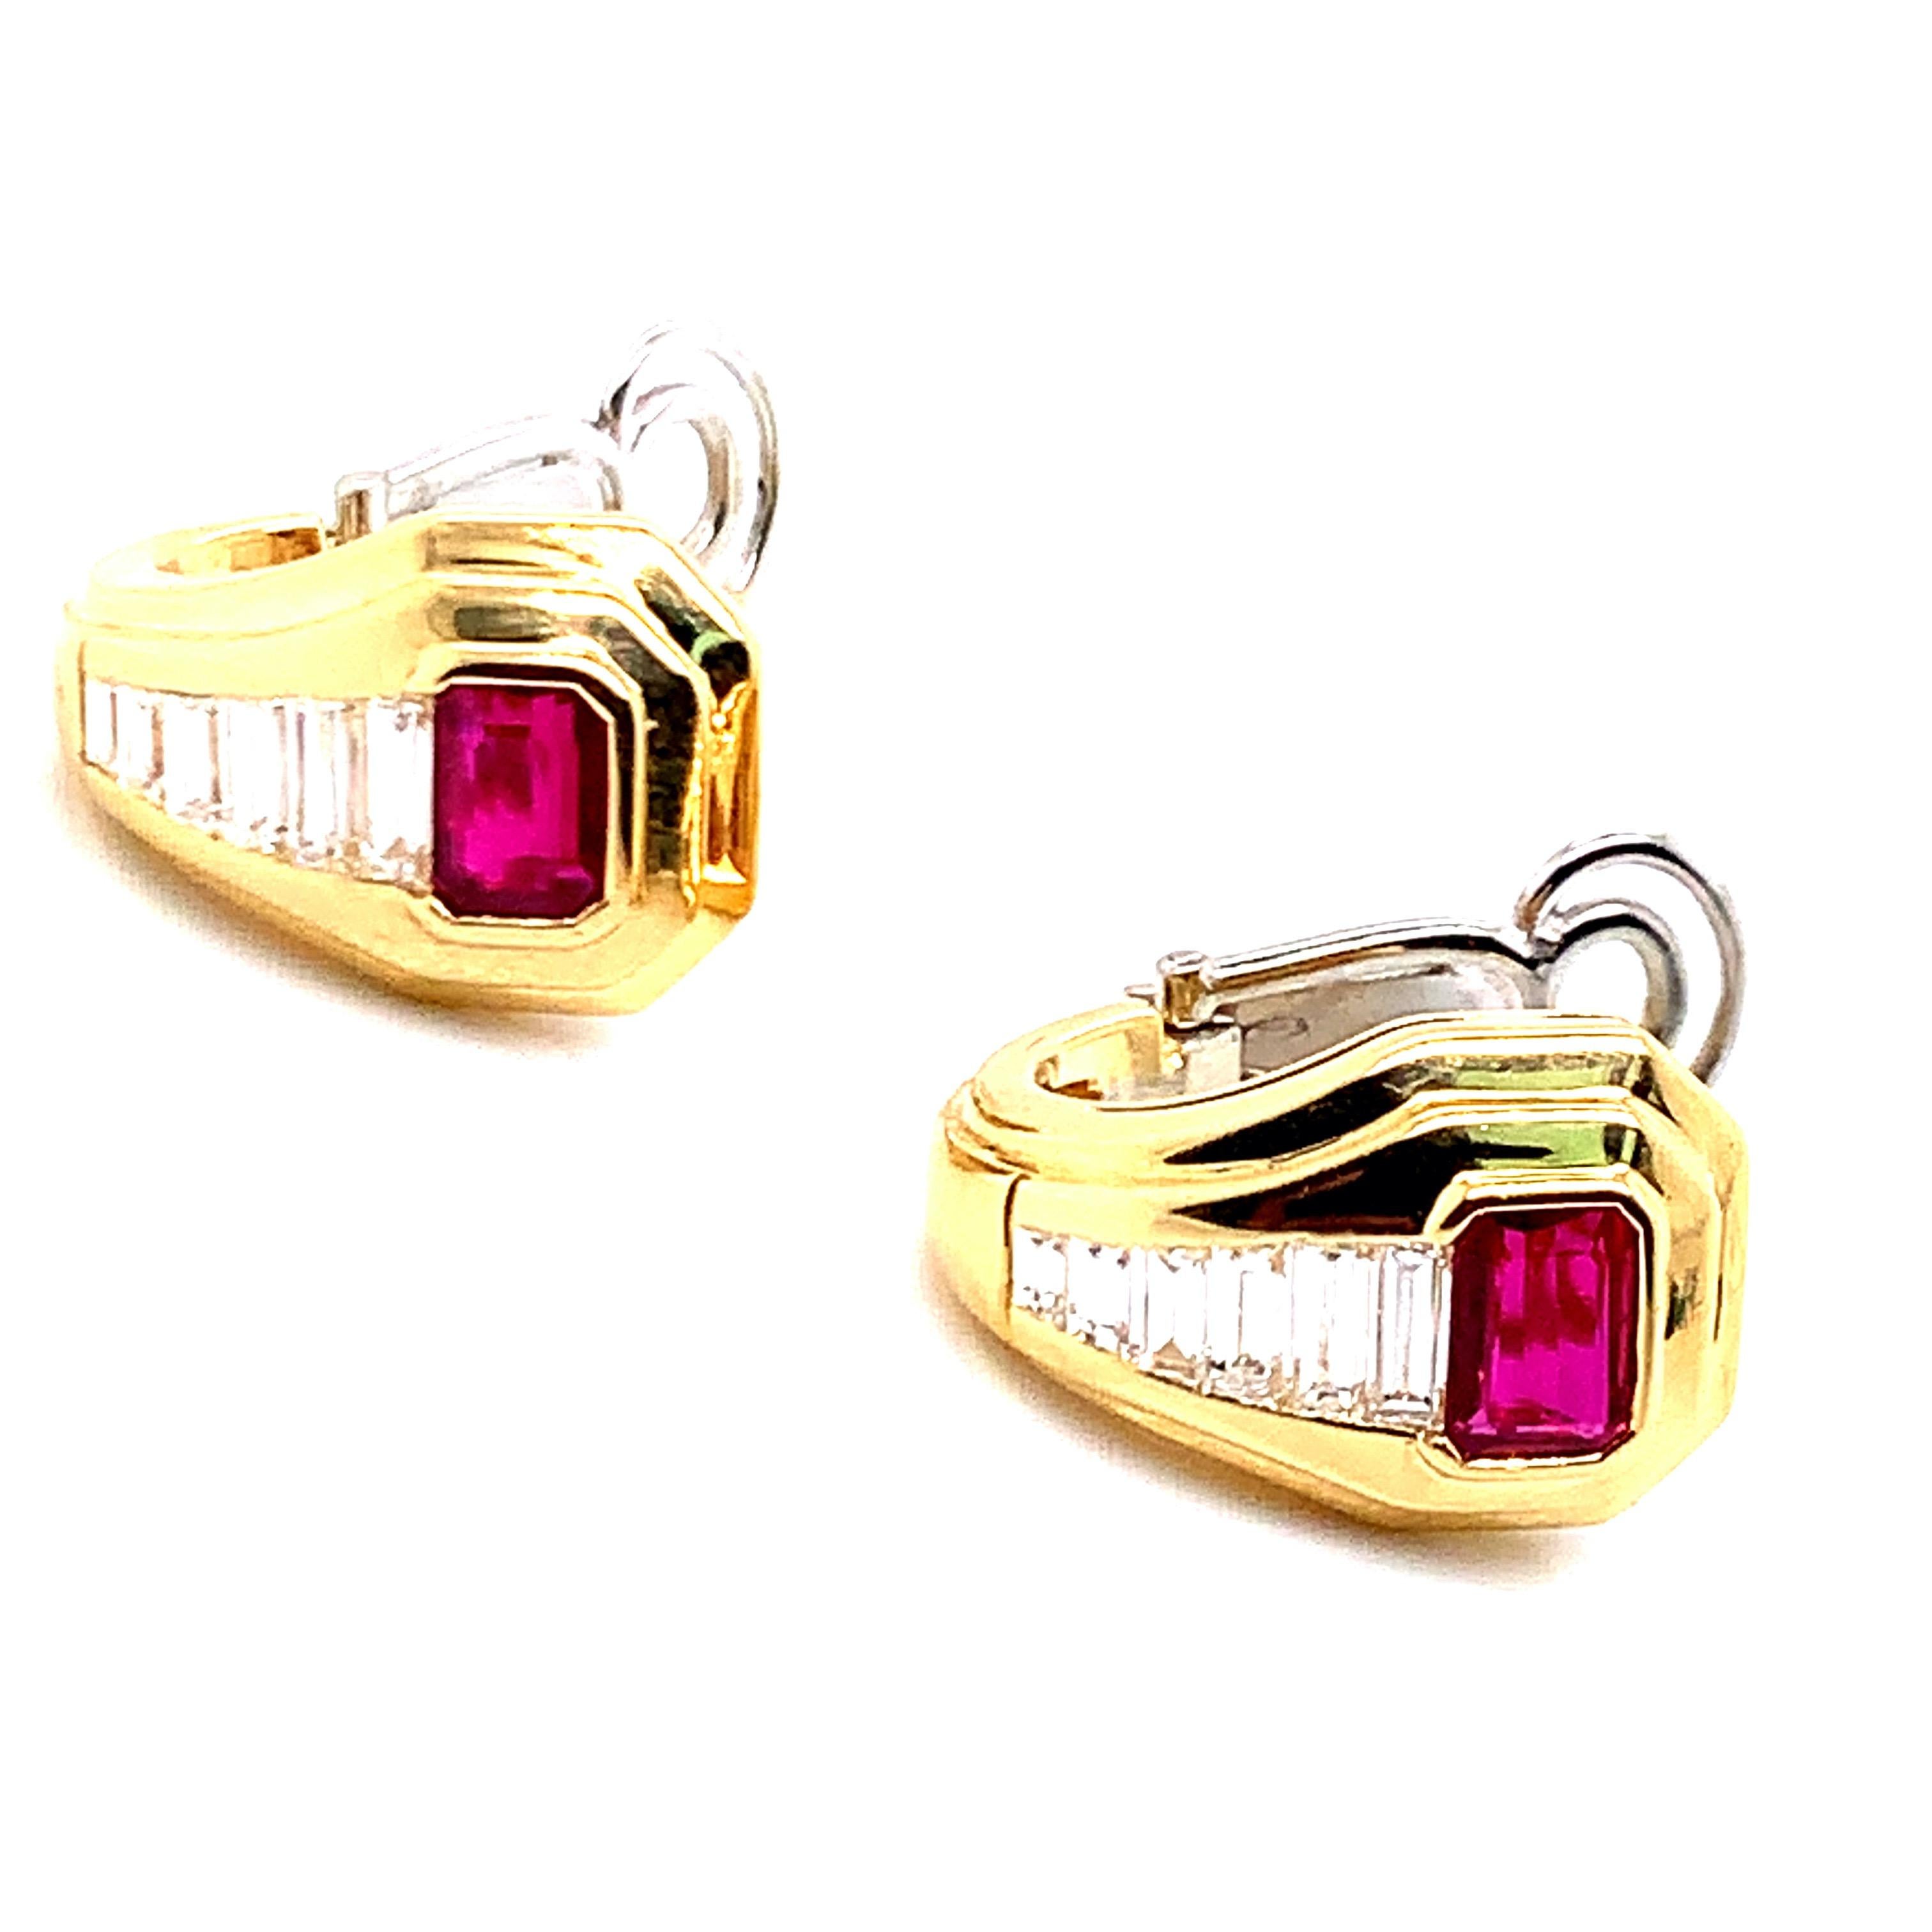 Emerald Cut Bvlgari Gold Ruby and Diamond Earrings For Sale